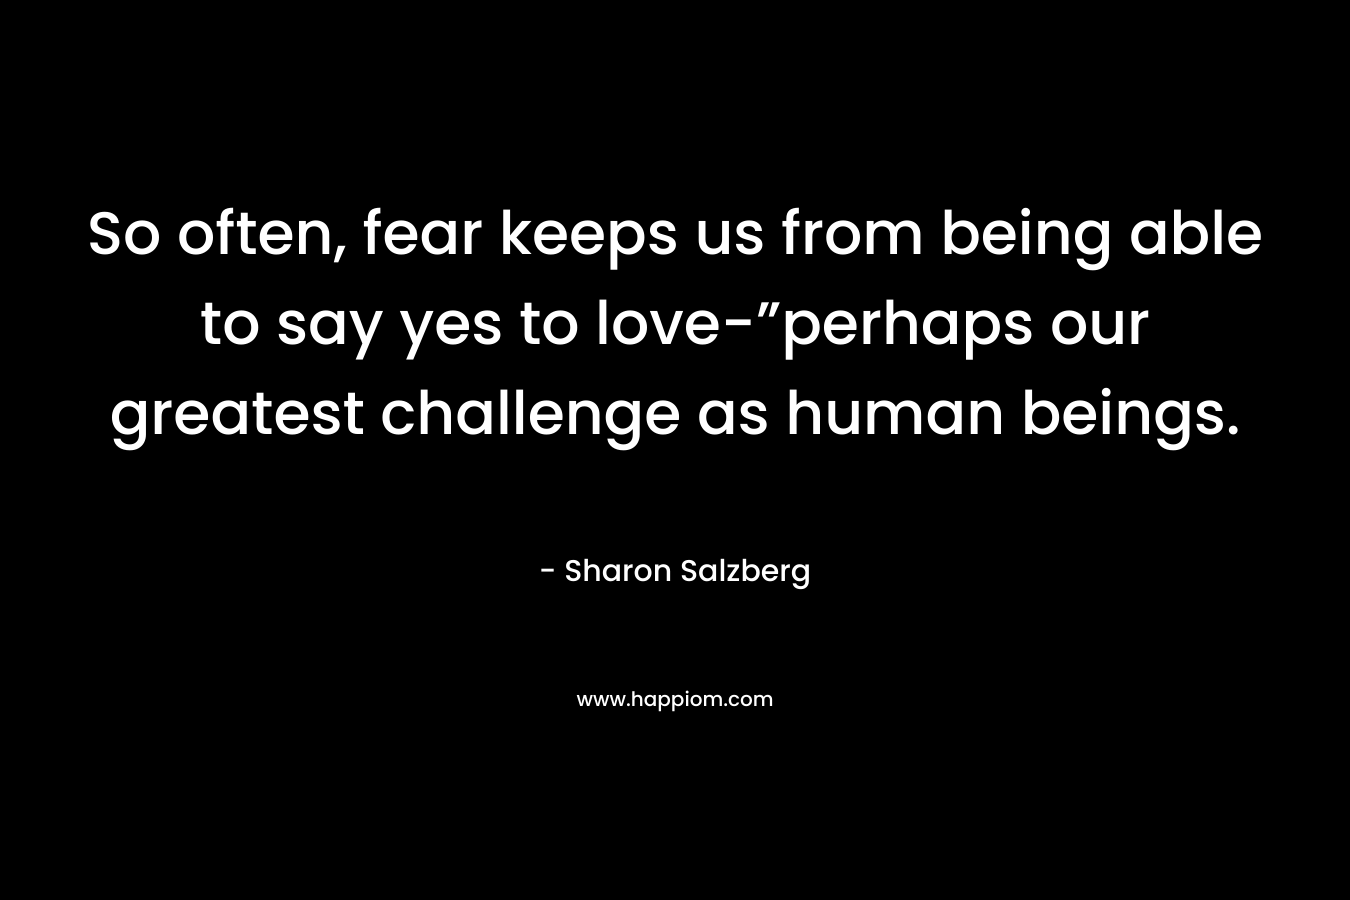 So often, fear keeps us from being able to say yes to love-”perhaps our greatest challenge as human beings.